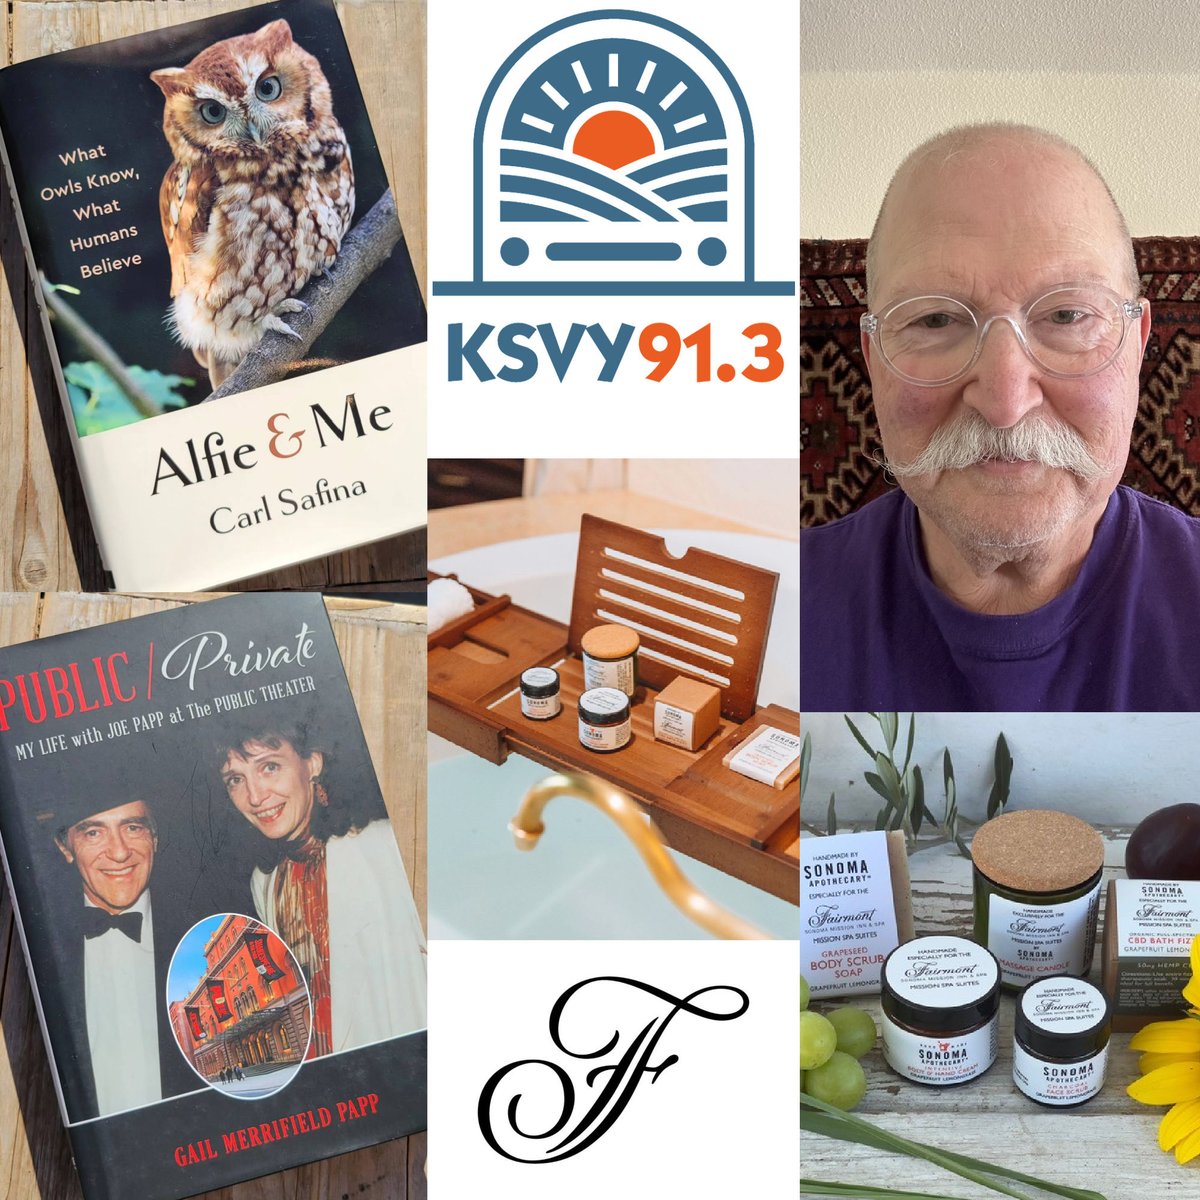 TUNE IN TOMORROW to the Morning Show on .@KSVYsonoma 8-10am PT w/ .@barnettsonoma, Louise Hassen, Michelle Heston of @fairmontsonoma, @carlsafina author of 'Alfie & Me', & Gail Merrifield Papp, author of 'PUBLIC/PRIVATE.' Listen >> 91.3 FM / ksvy.org.